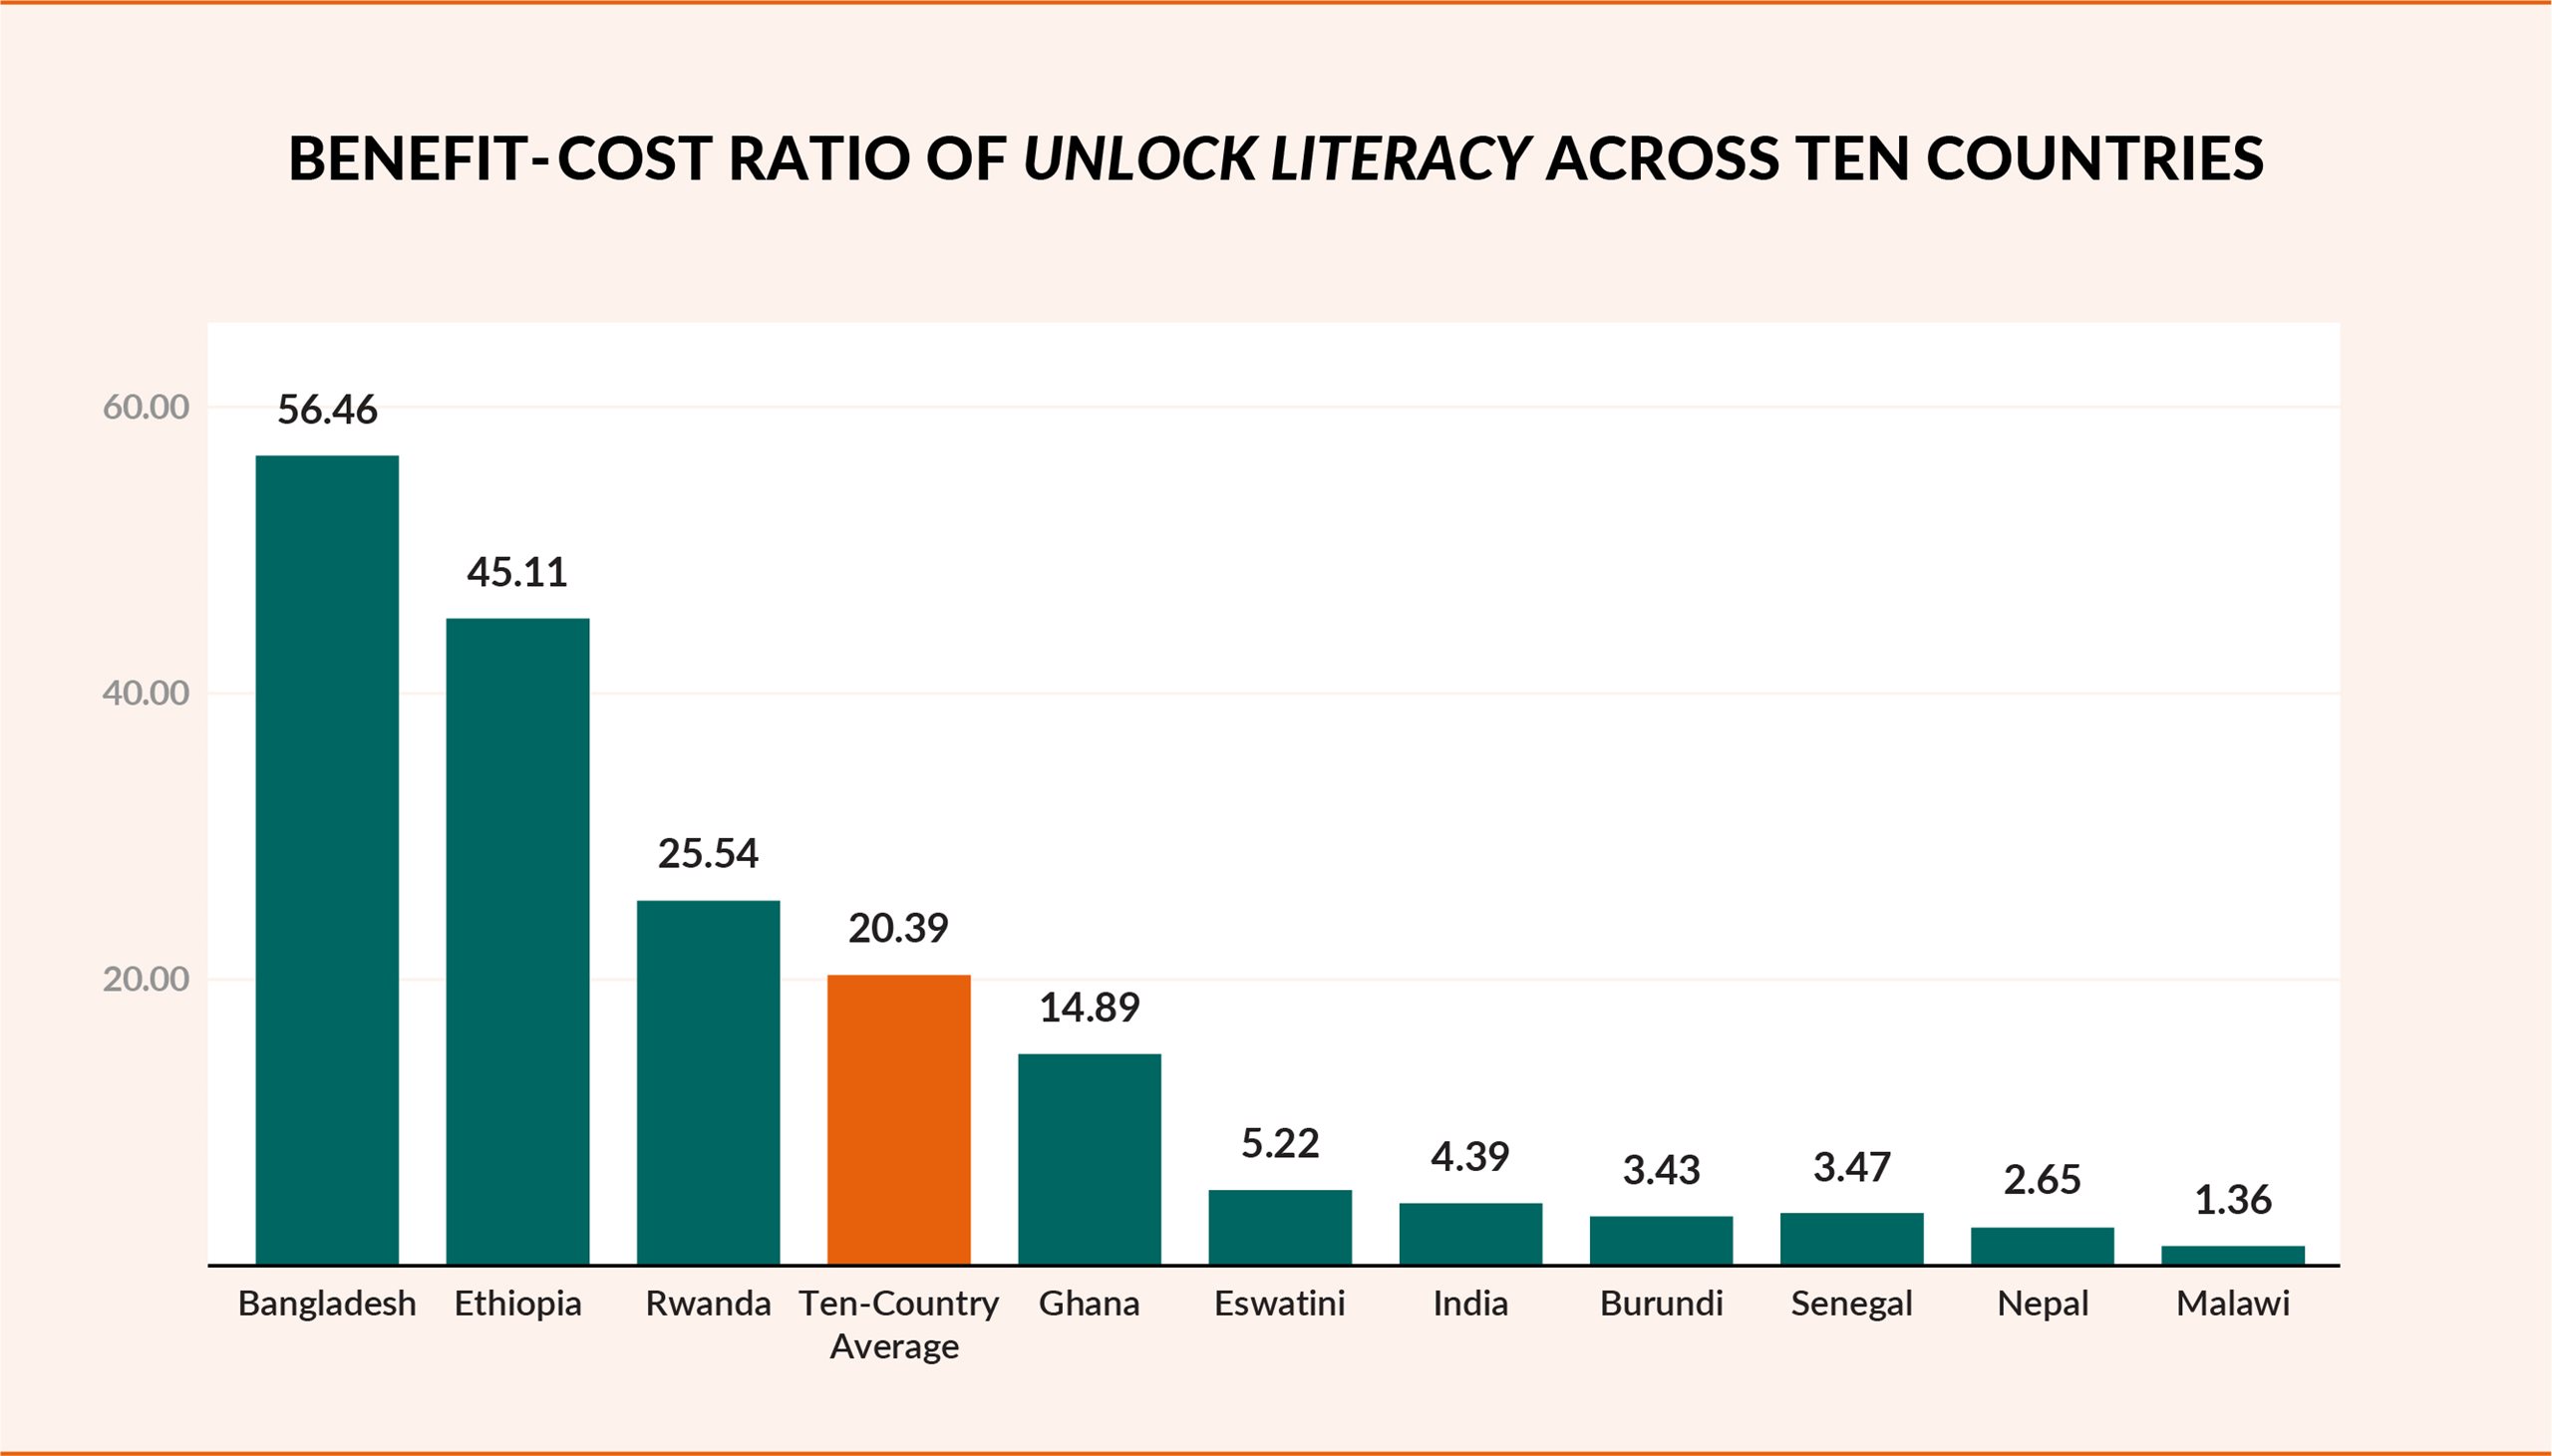 Graph shows the benefit-cost ratio of Unlock Literacy across 10 countries.